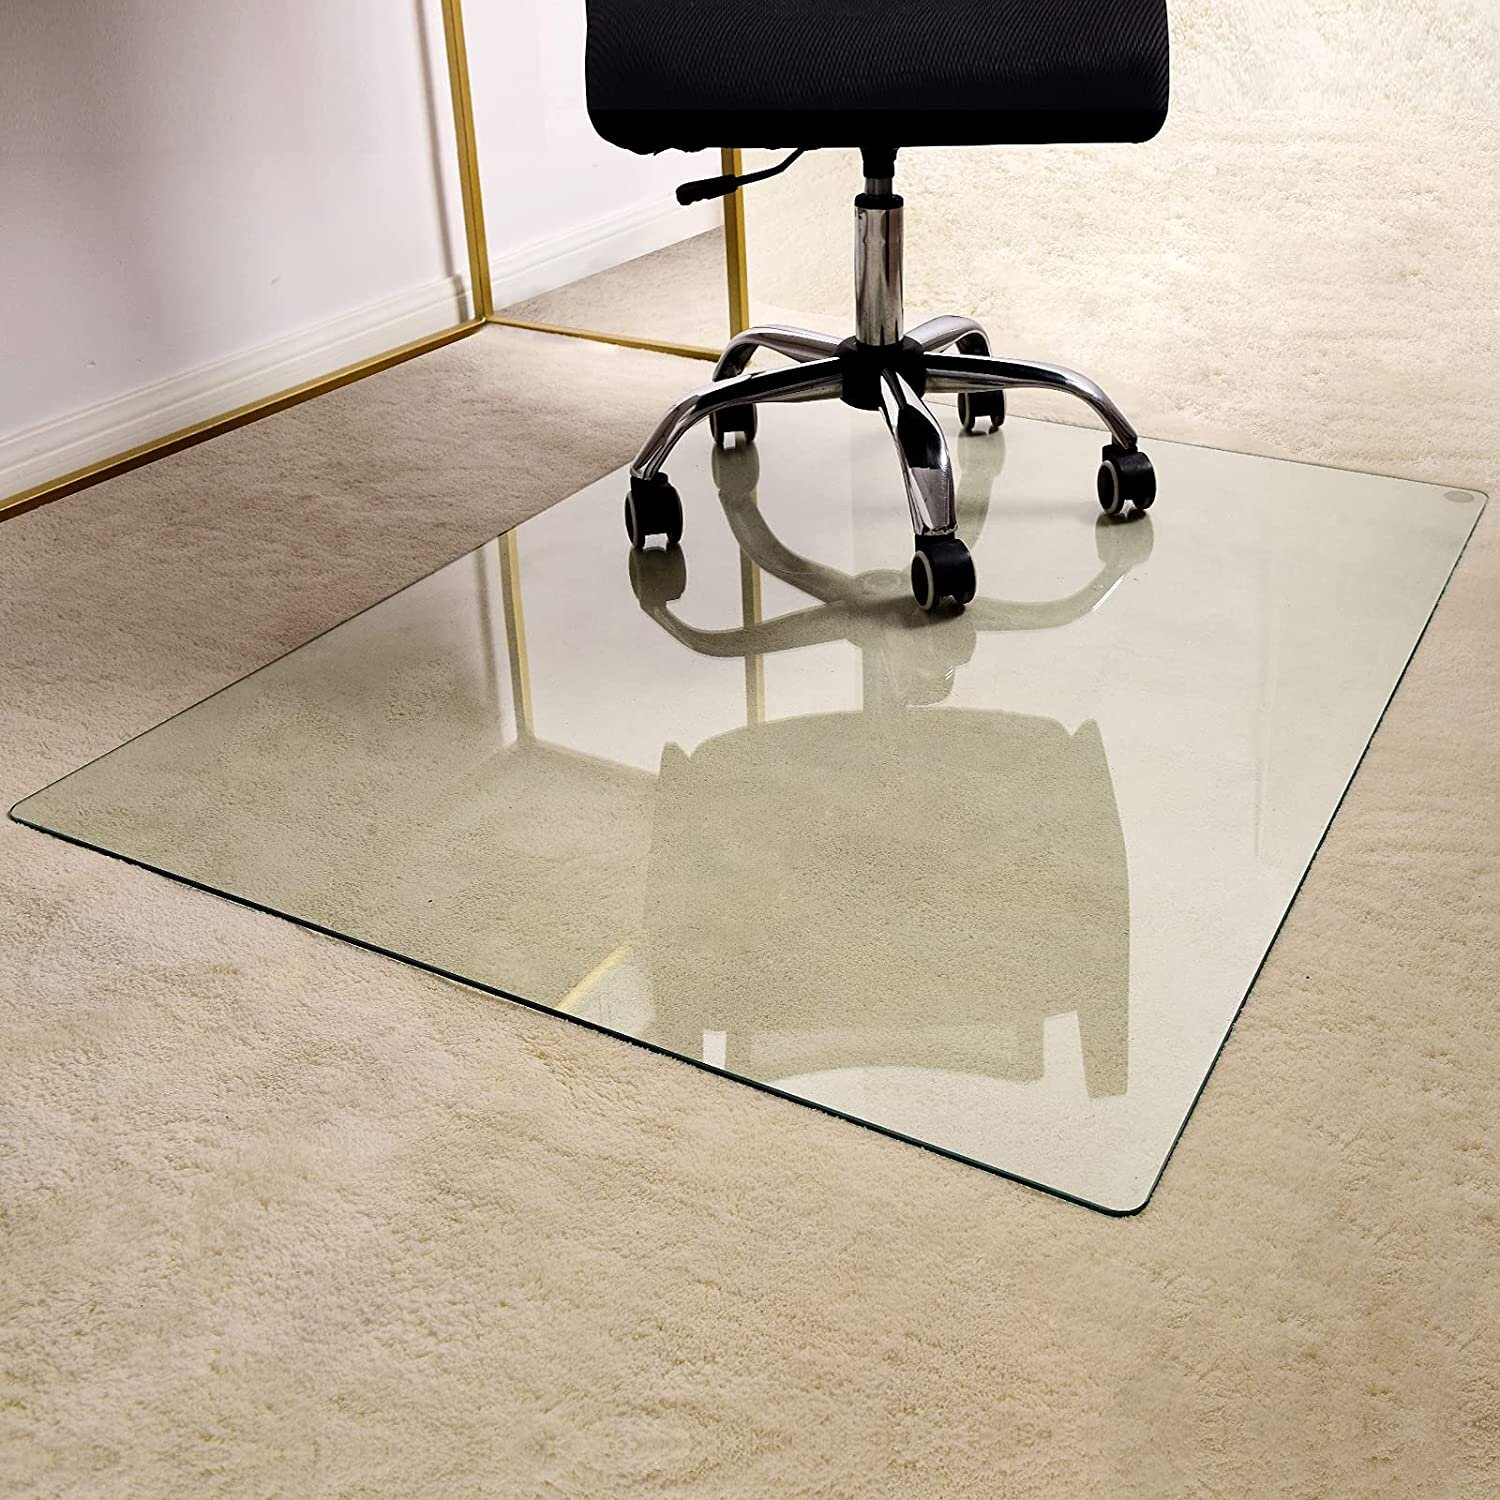 36" x 46" Tempered Glass Chair Mat  Scratch Resistant Any Type Flooring 